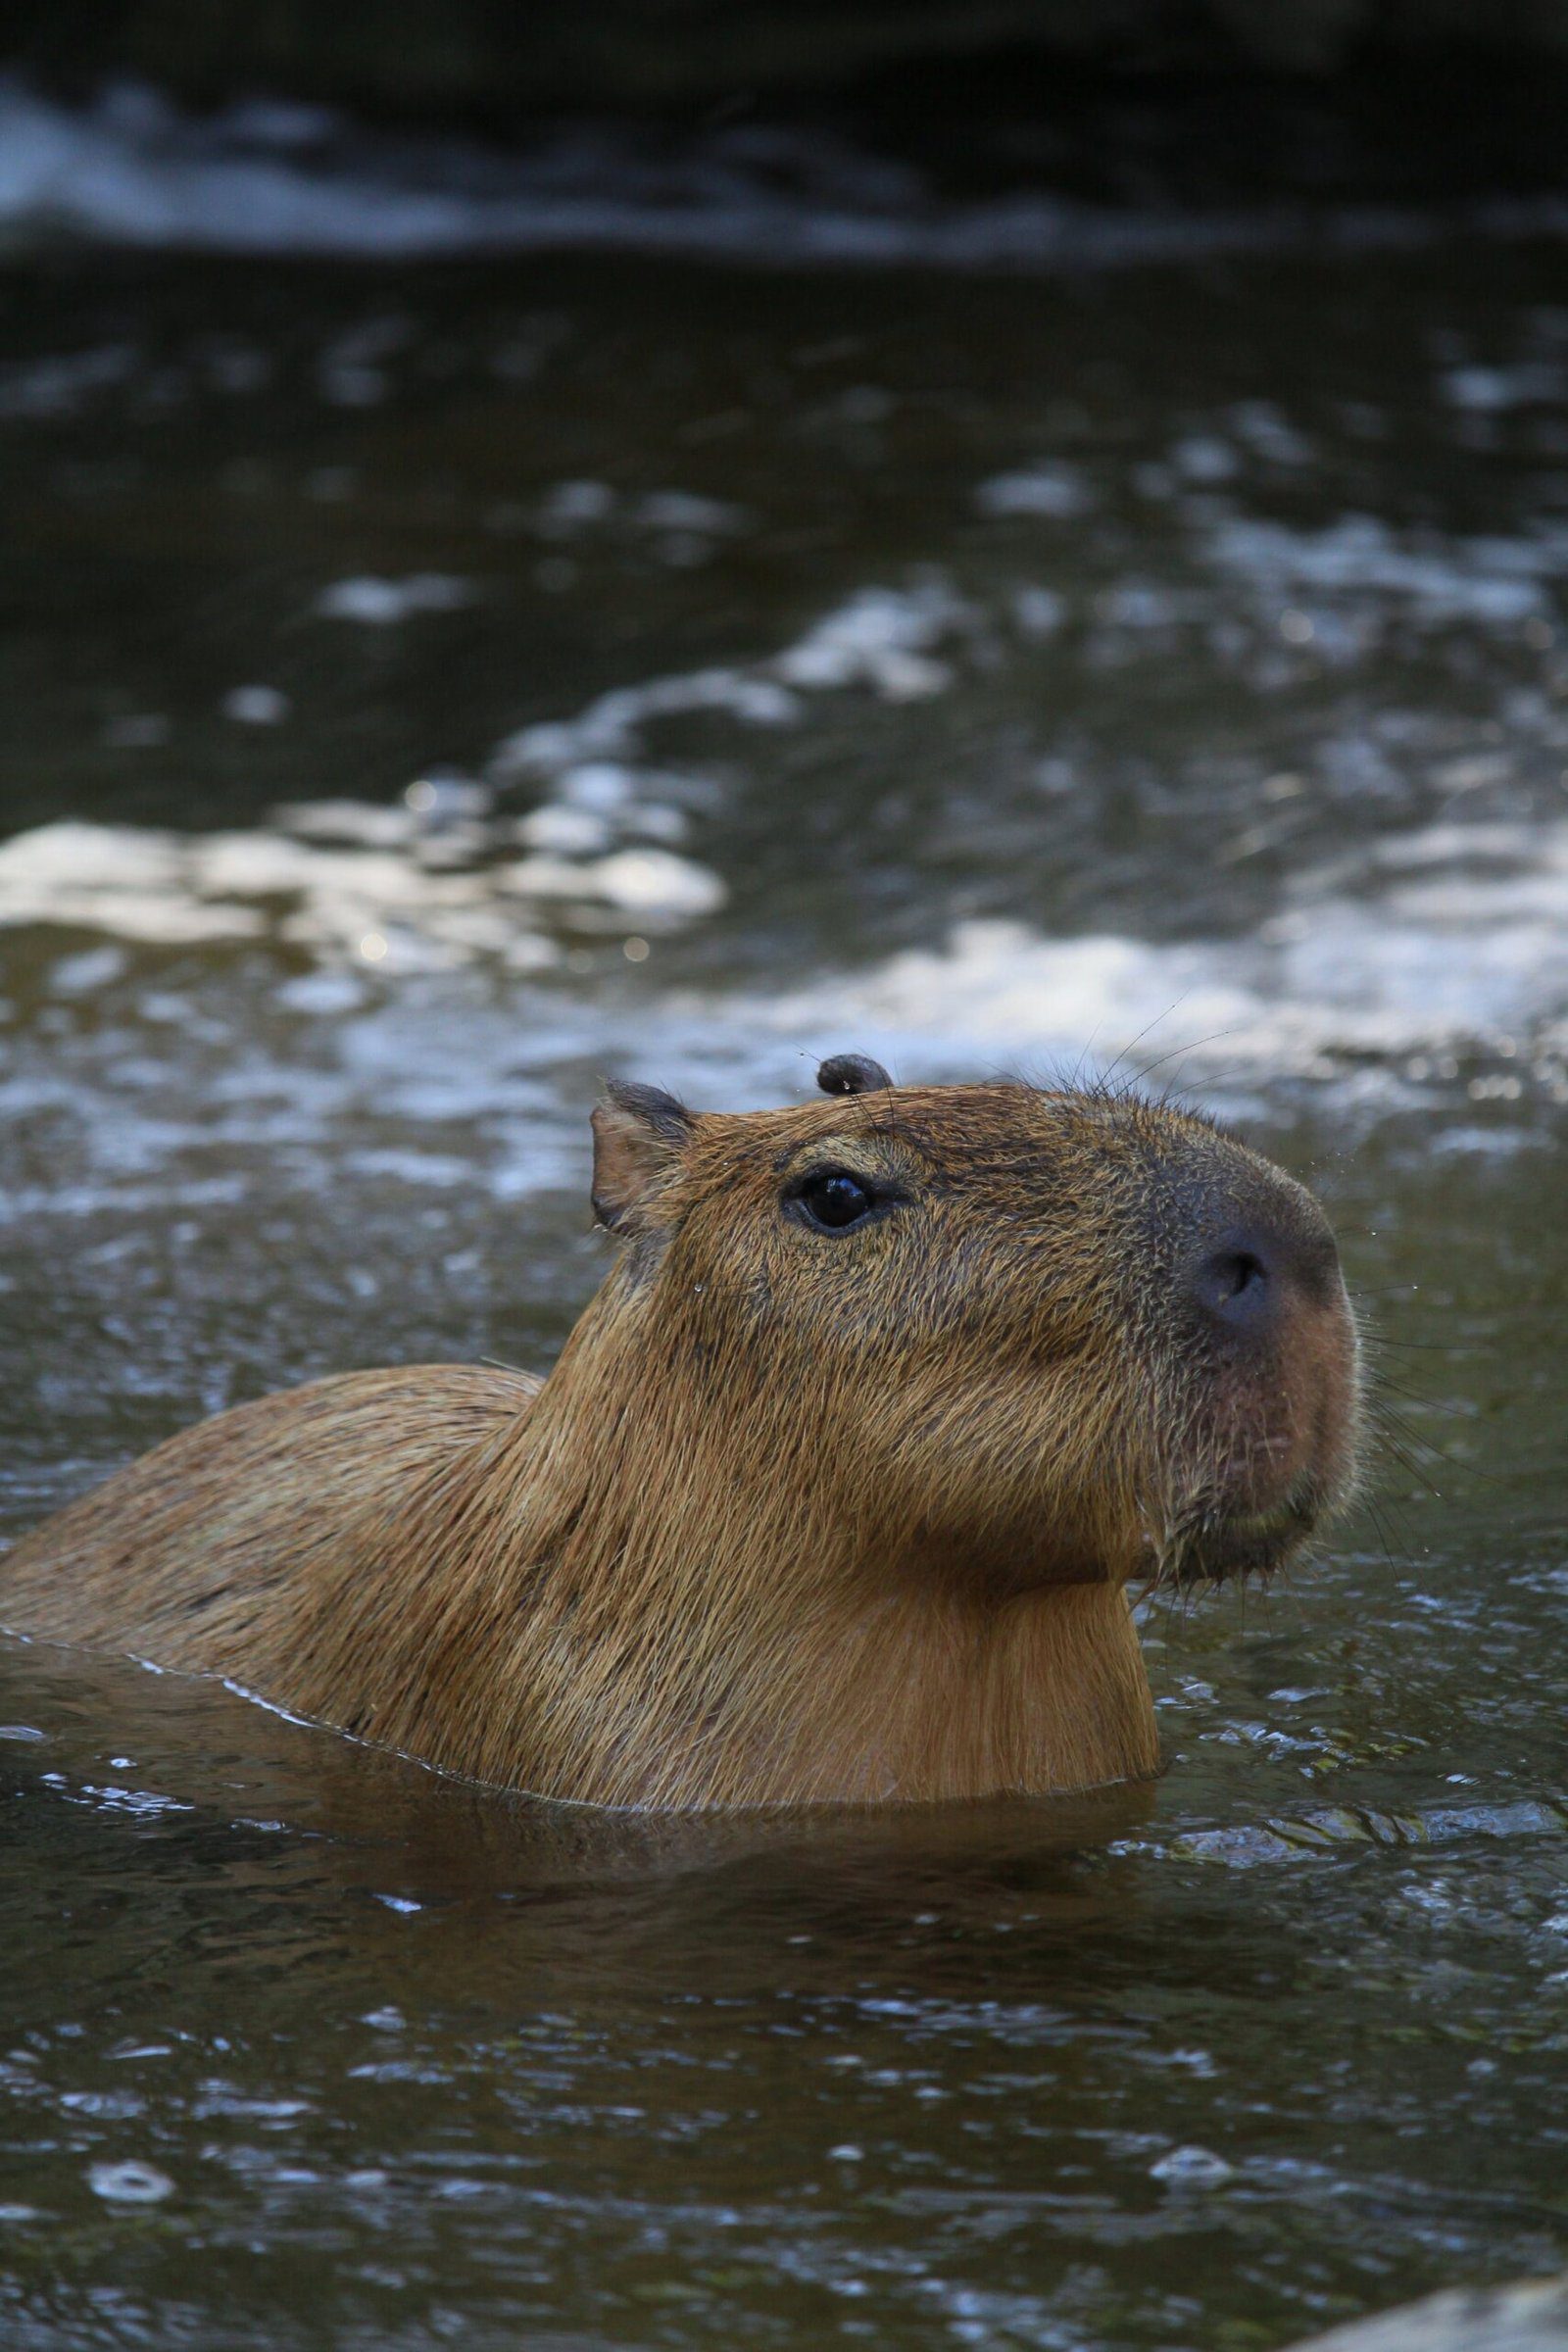 Best Places to See Capybaras Near Me